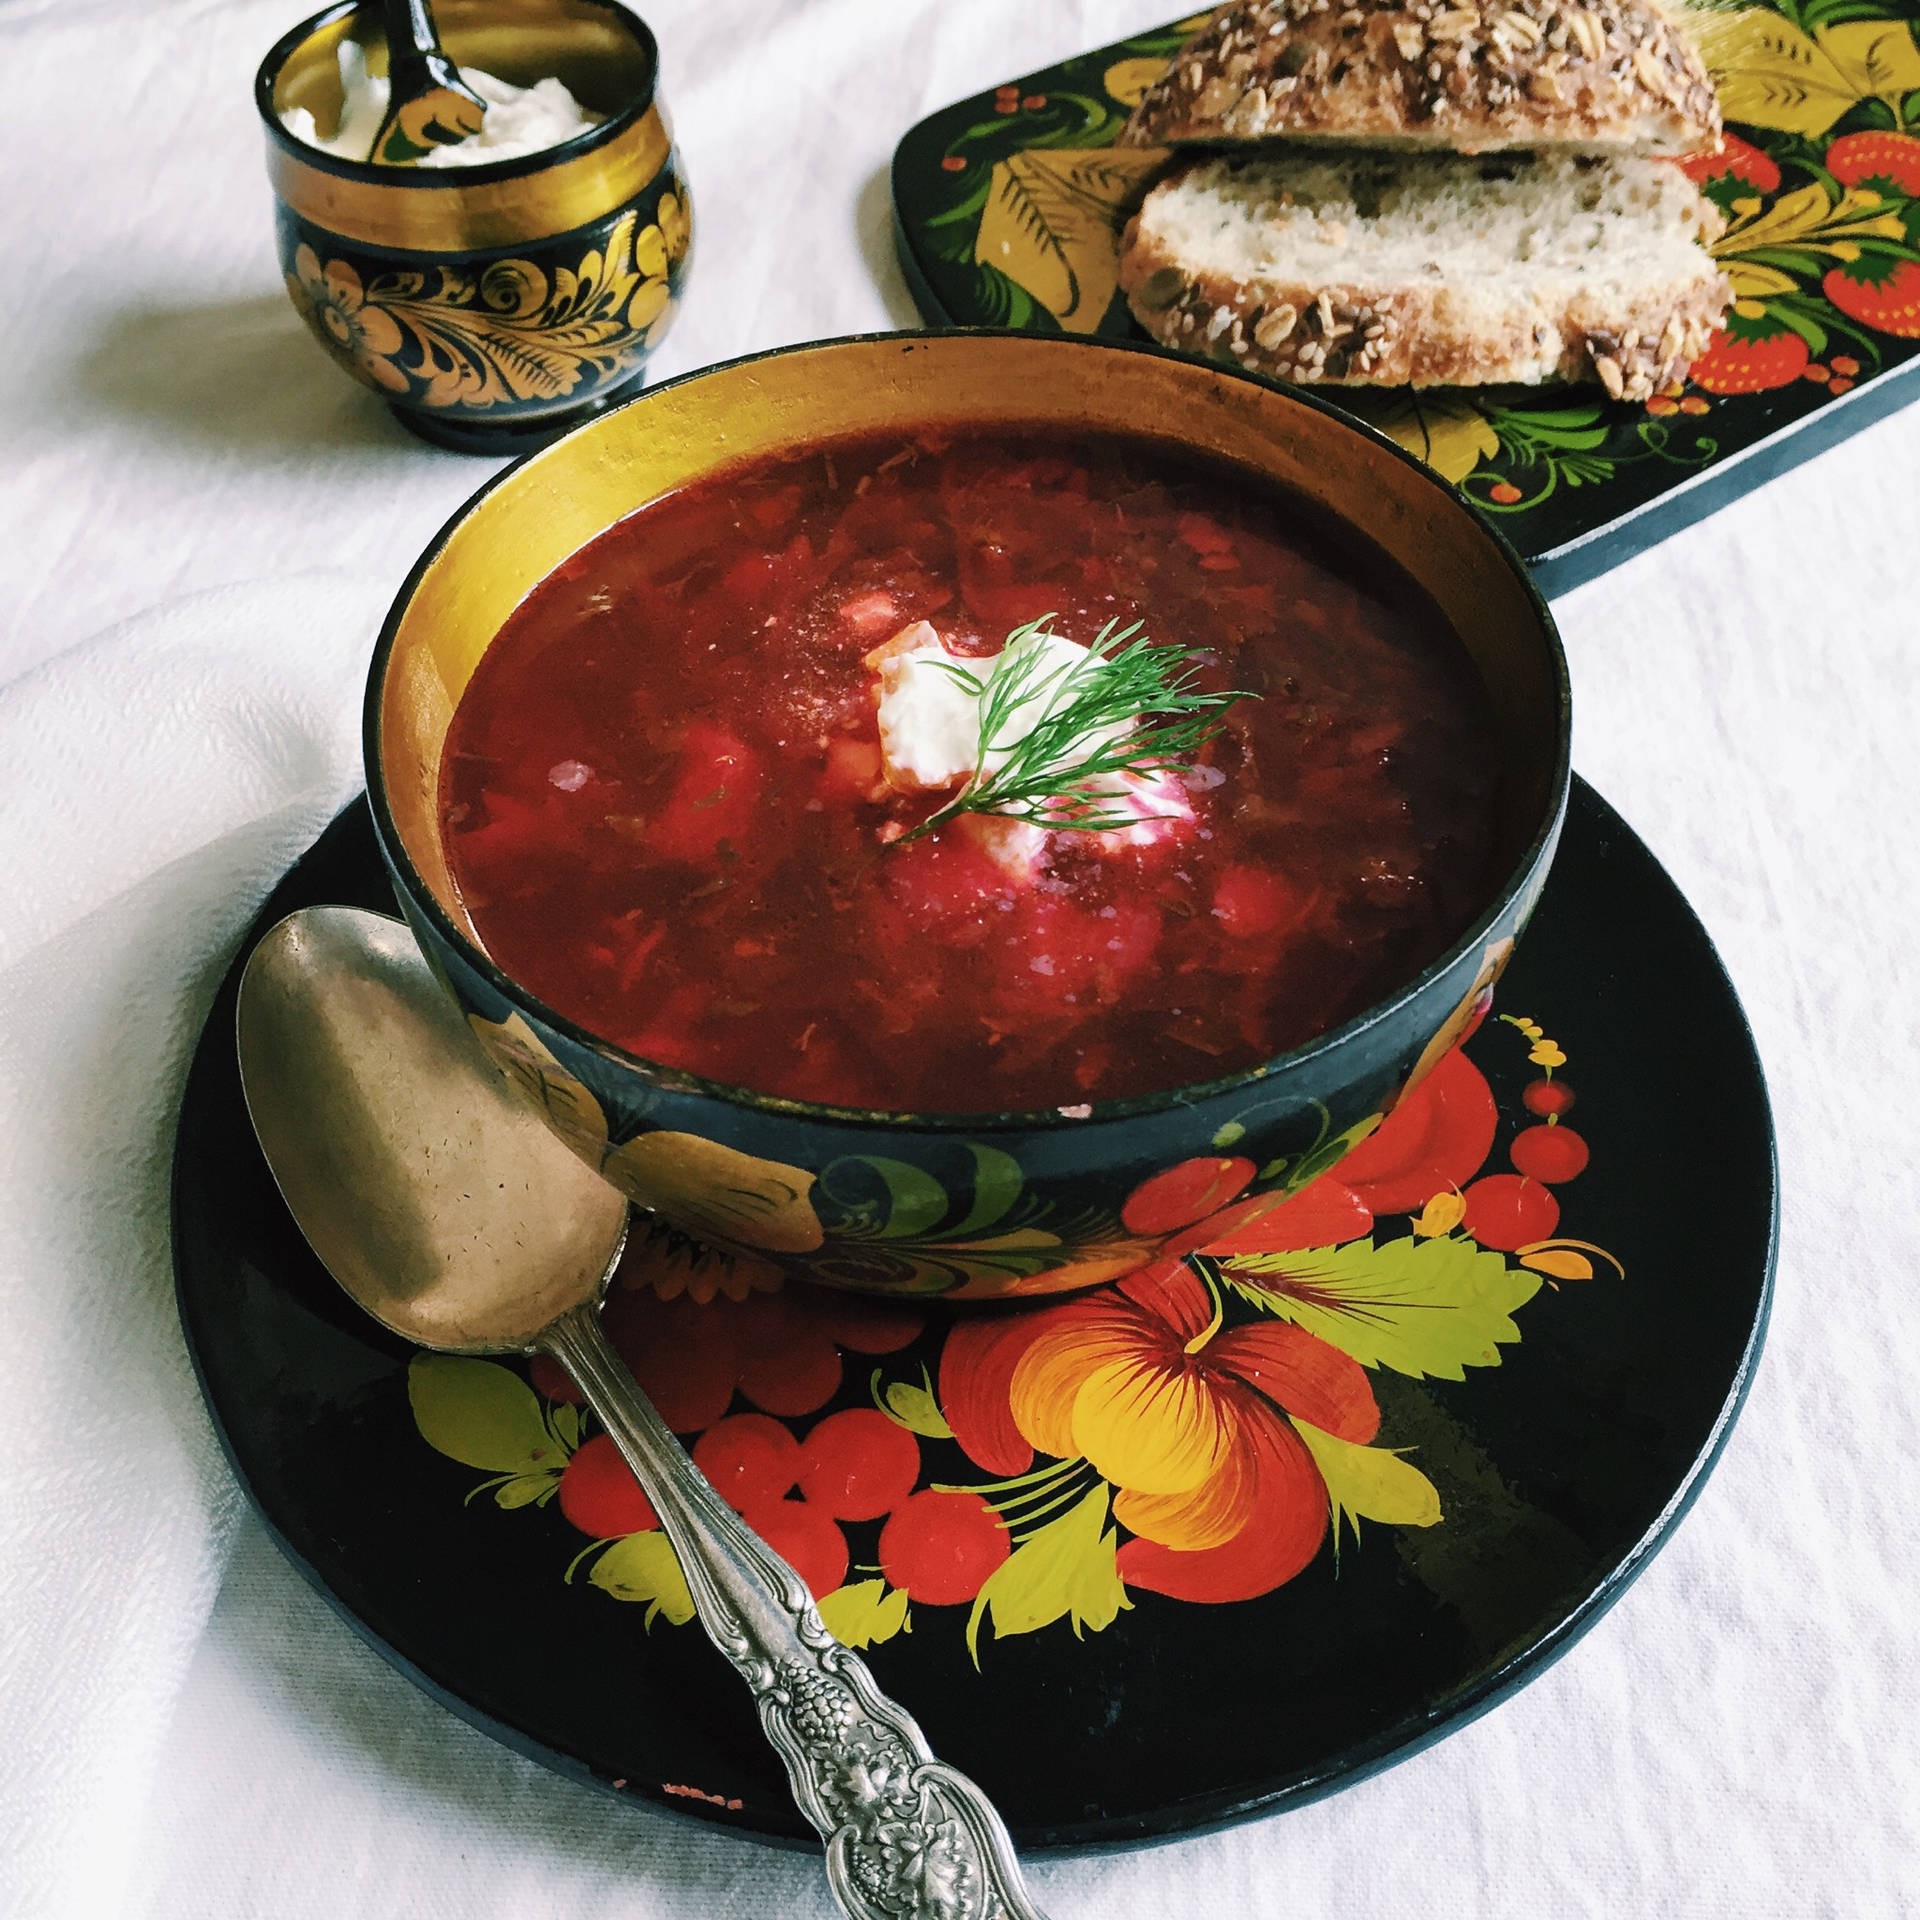 Delectable Borscht Soup Served with Crust Wheat Bread Wallpaper